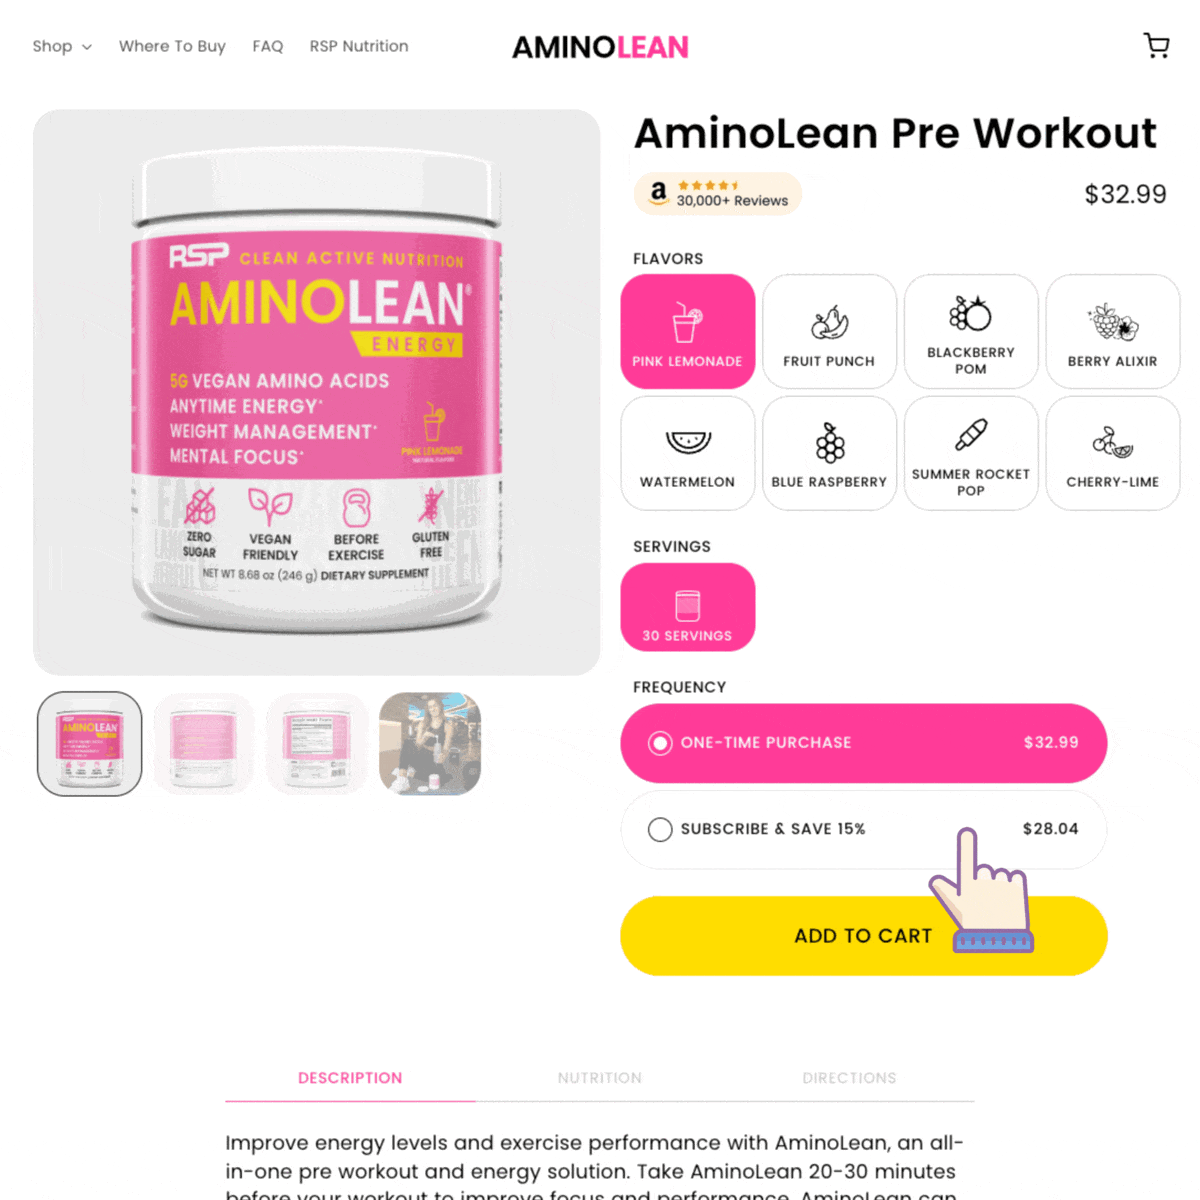 Screen recording demonstrating how to subscribe. A pointer clicks on the "Subscribe & Save" option on the AminoLean Pink Lemonade Pre Workout product page. The delivery frequency is set and the product is added to cart. Finally, the pointer indicates clicking on the "Checkout" button to continue to the subscription checkout.